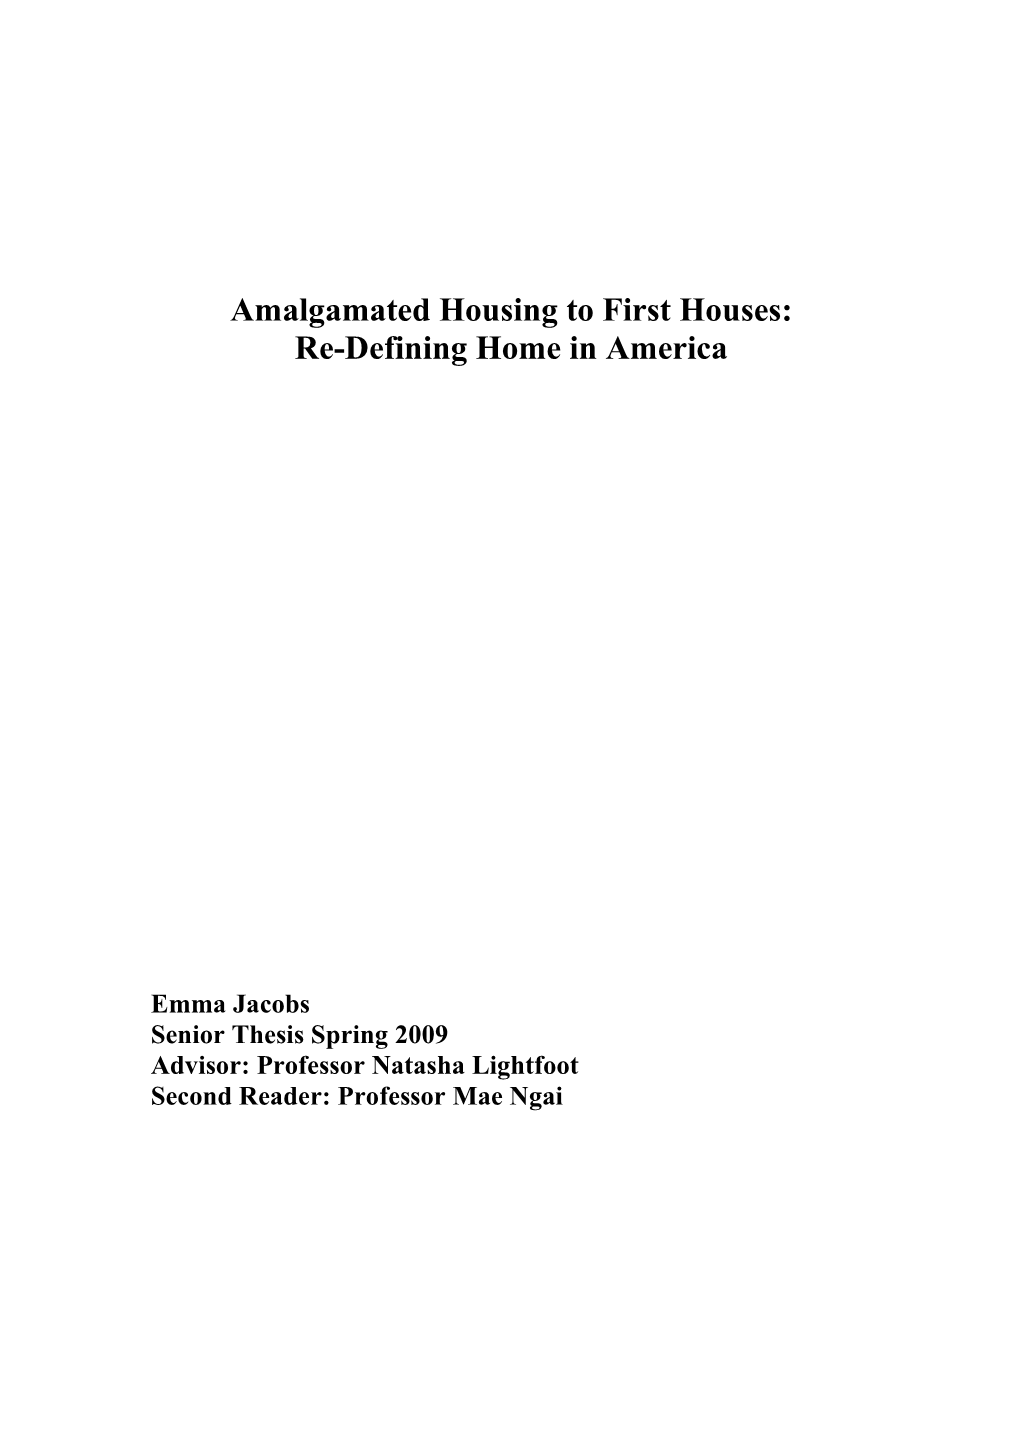 Amalgamated Housing to First Houses: Re-Defining Home in America